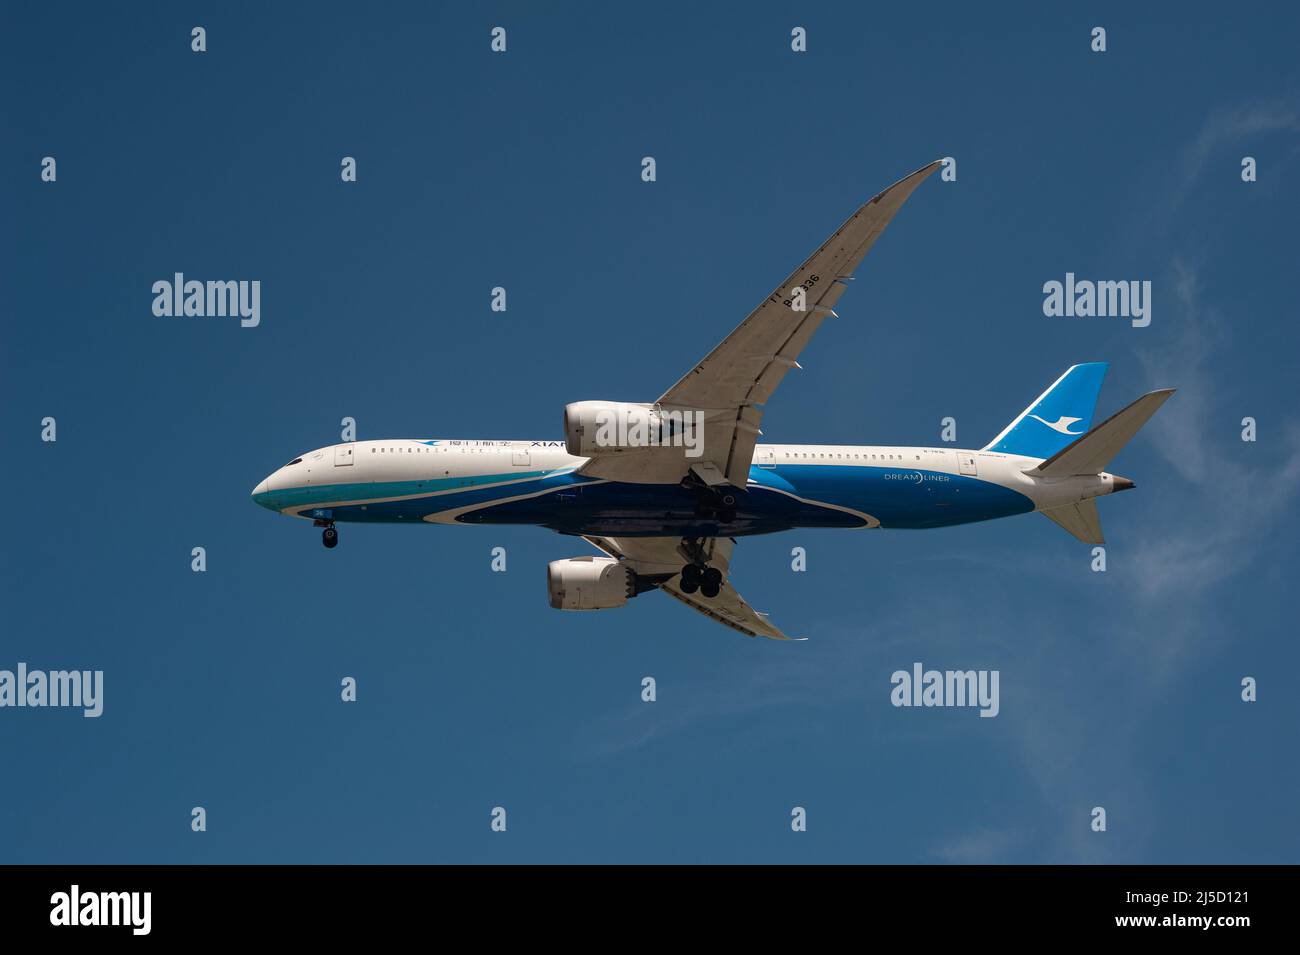 Apr. 07, 2021, Singapore, Republic of Singapore, Asia - A Xiamen Air Boeing 787-9 Dreamliner passenger aircraft with registration B-7836 on approach to Changi International Airport during the ongoing Corona crisis. [automated translation] Stock Photo